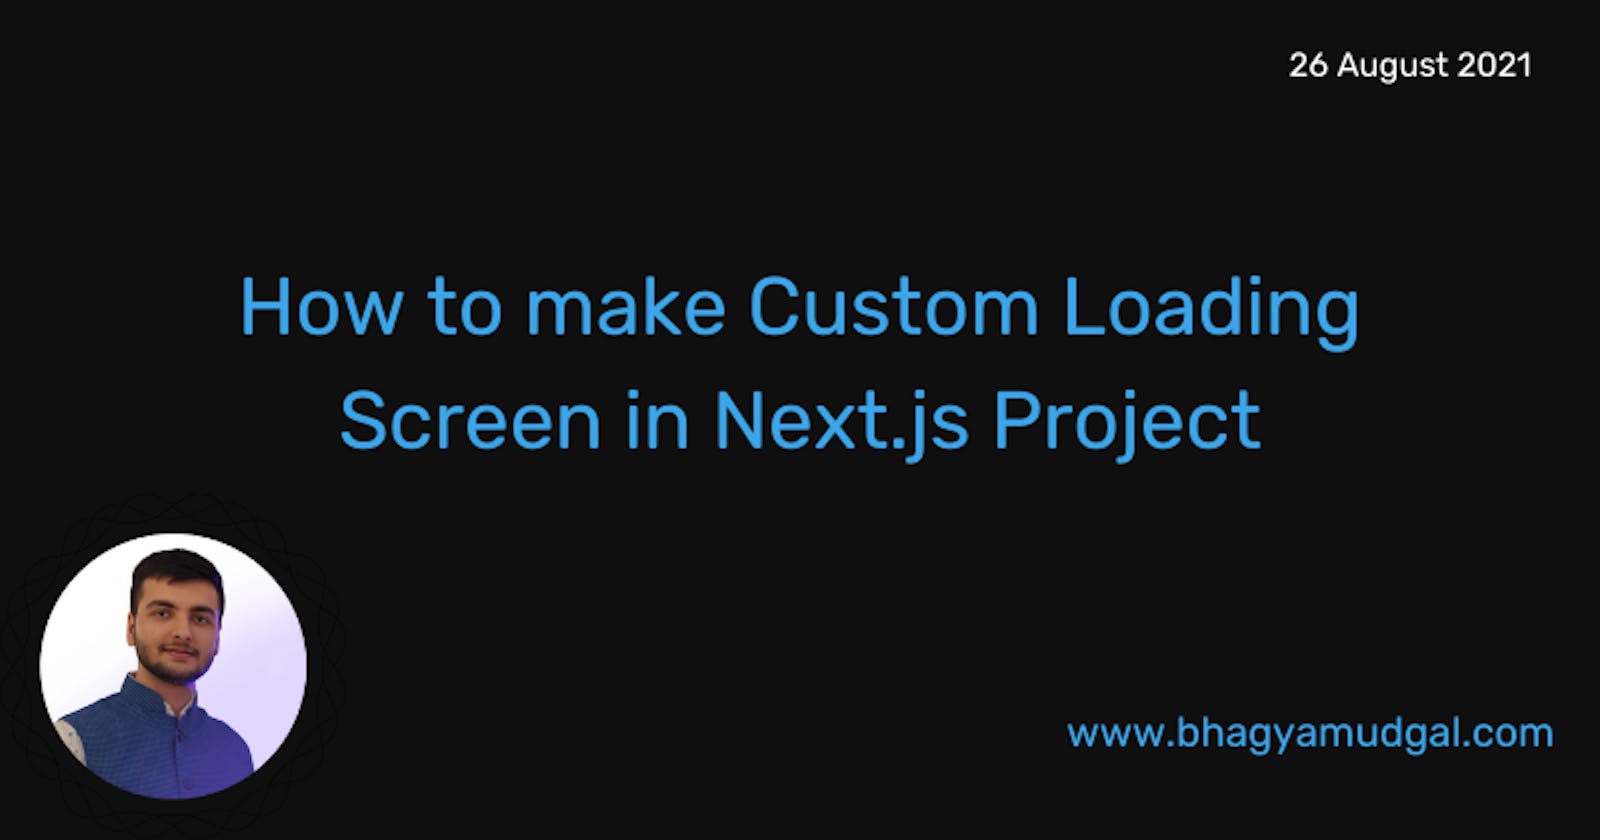 How to make Custom Loading Screen in Next.js Project